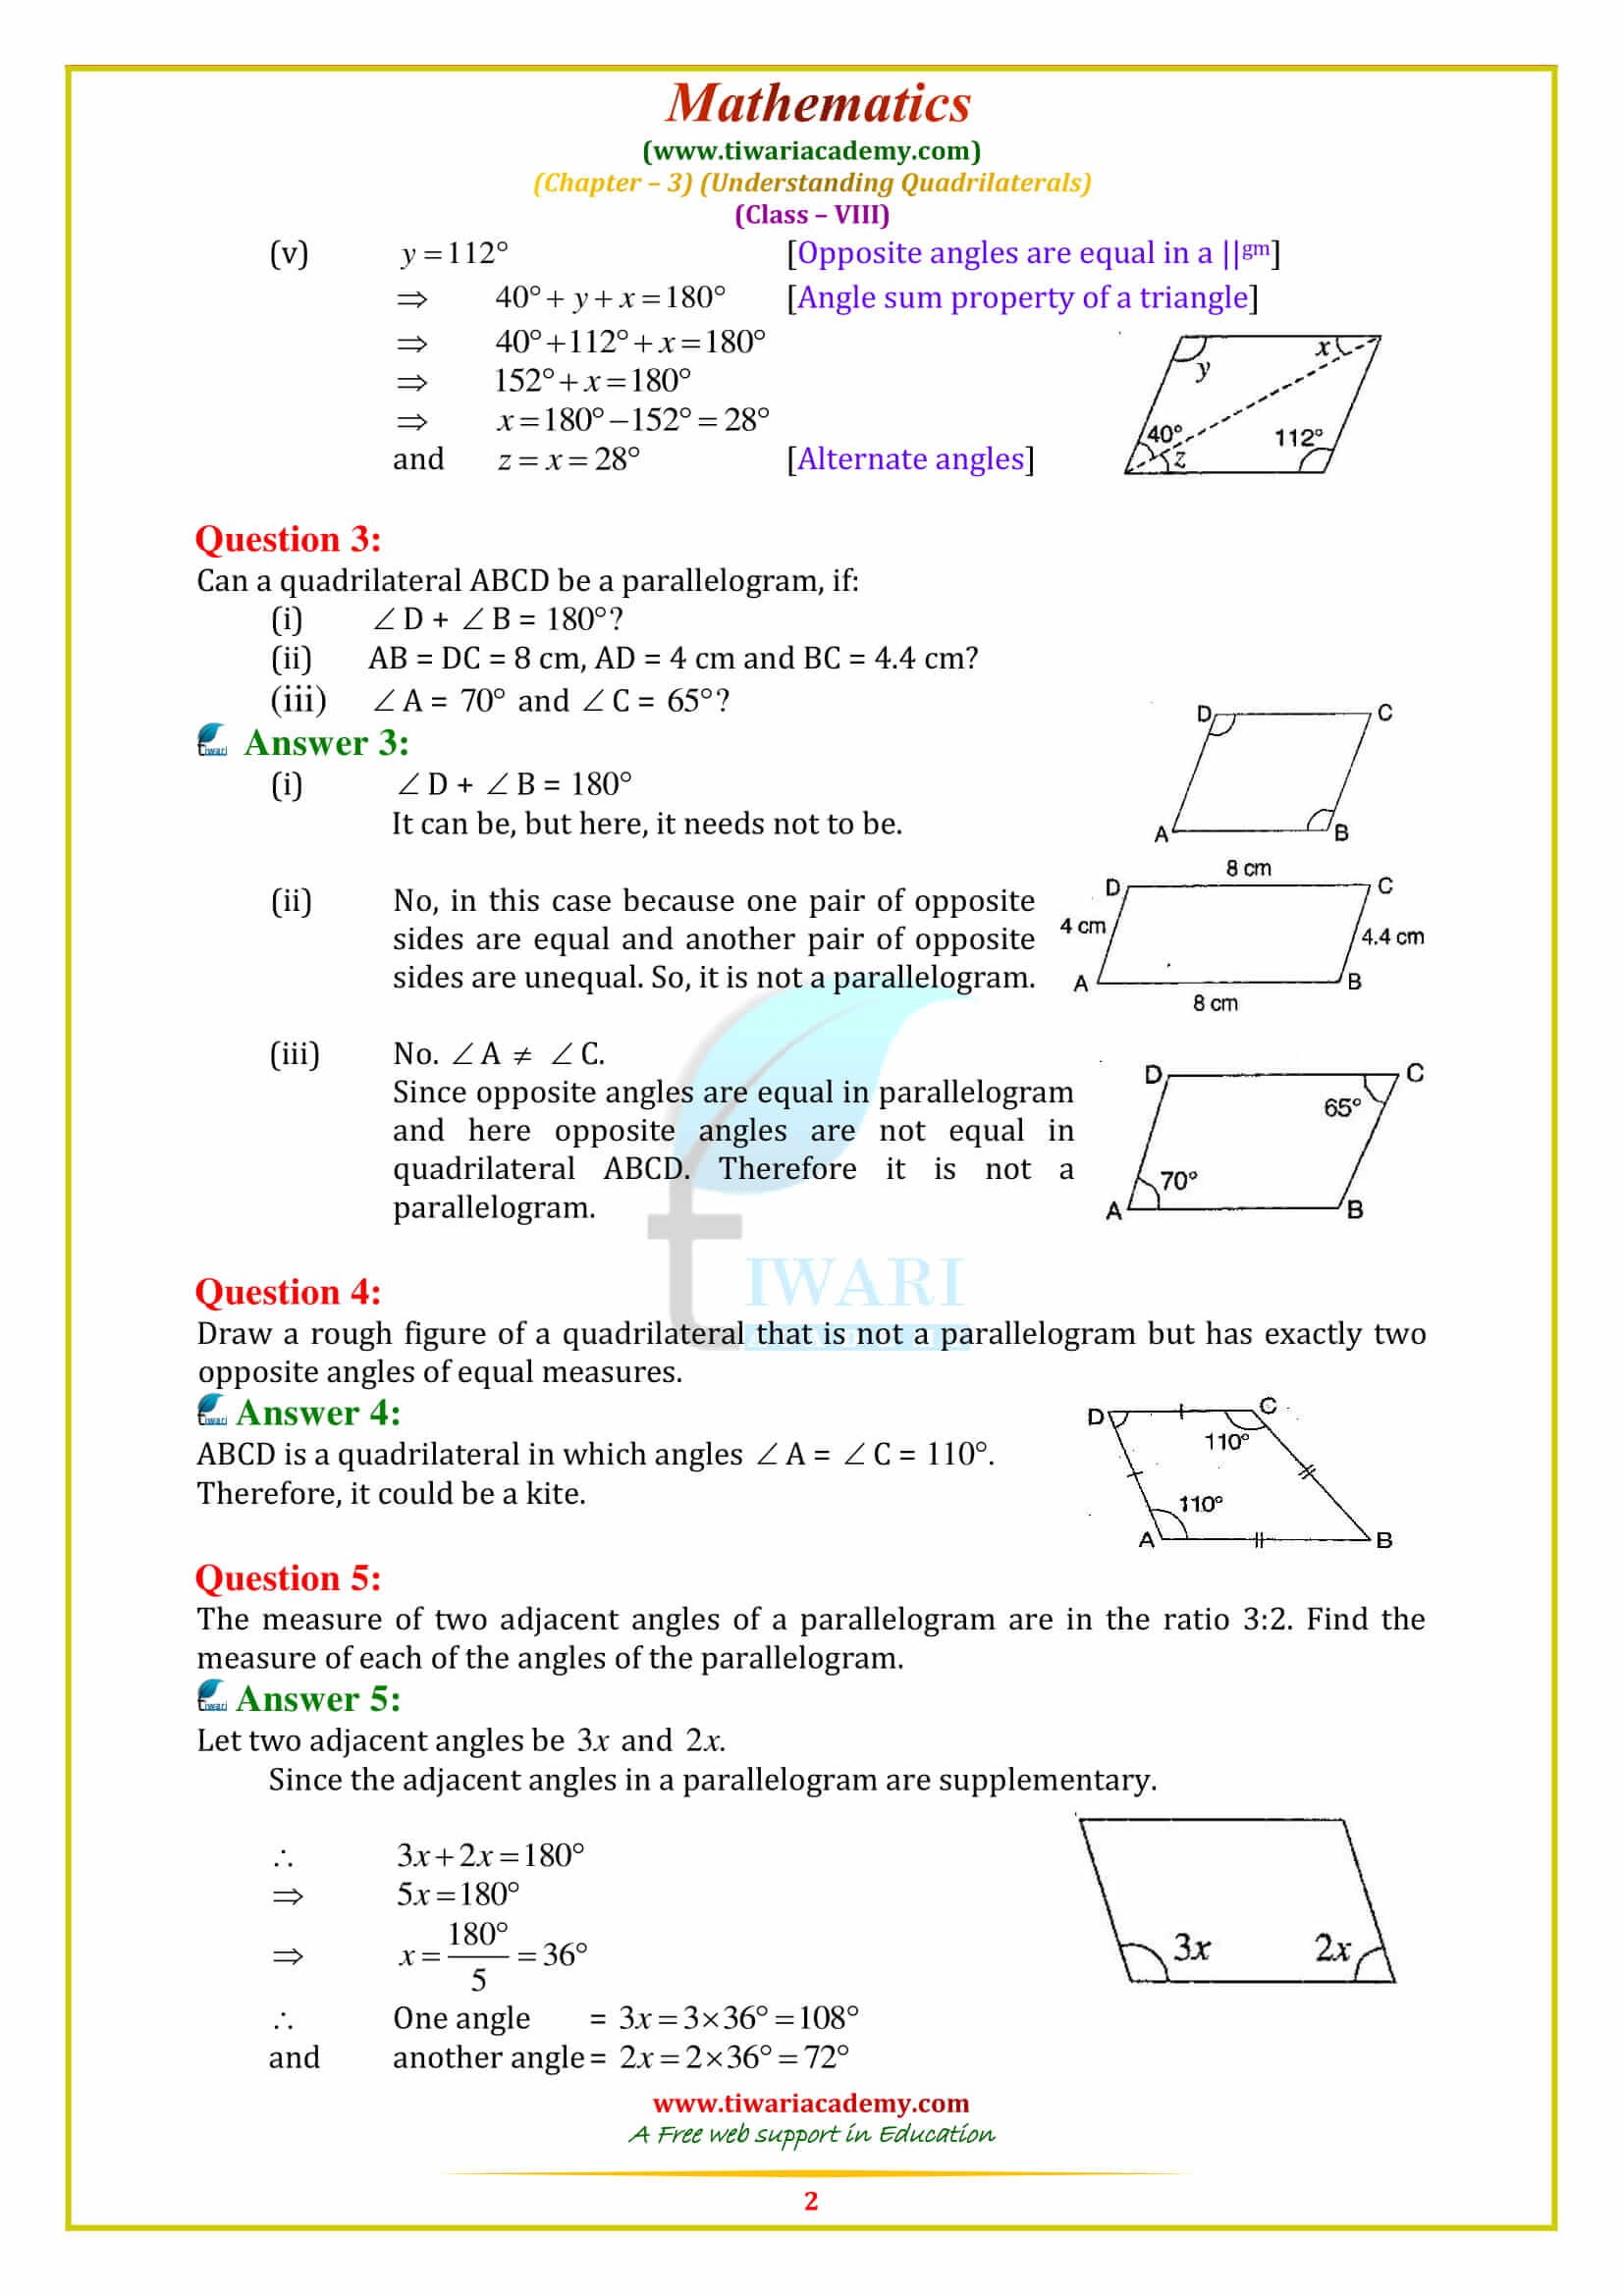 NCERT Solutions for Class 8 Maths Chapter 3 Exercise 3.3 in free pdf download